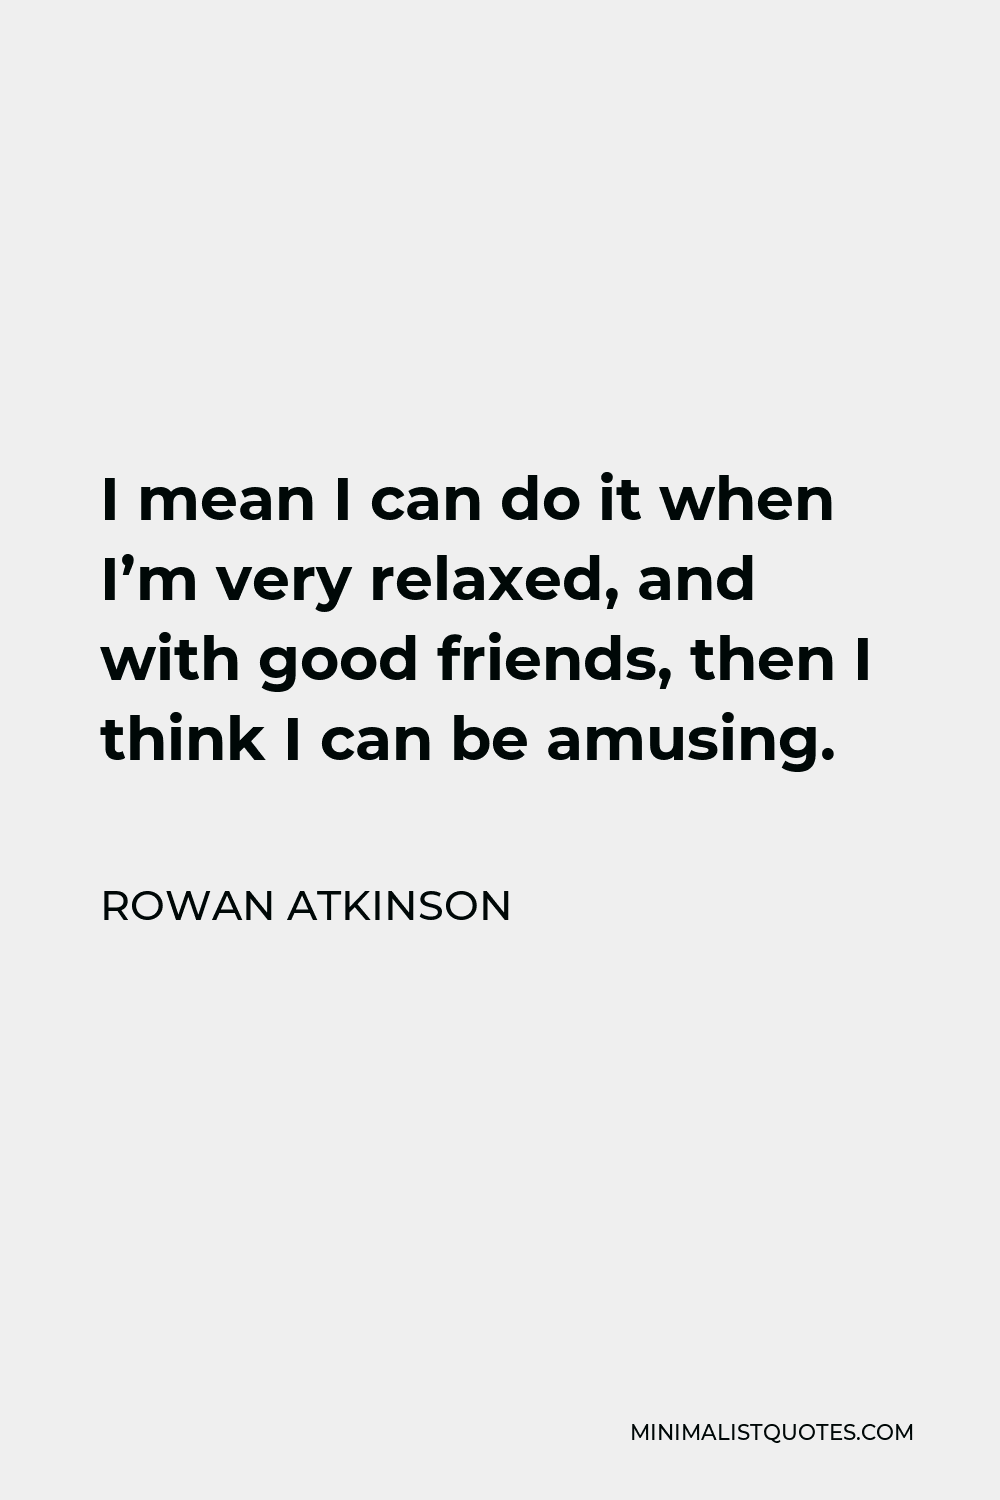 Rowan Atkinson Quote - I mean I can do it when I’m very relaxed, and with good friends, then I think I can be amusing.